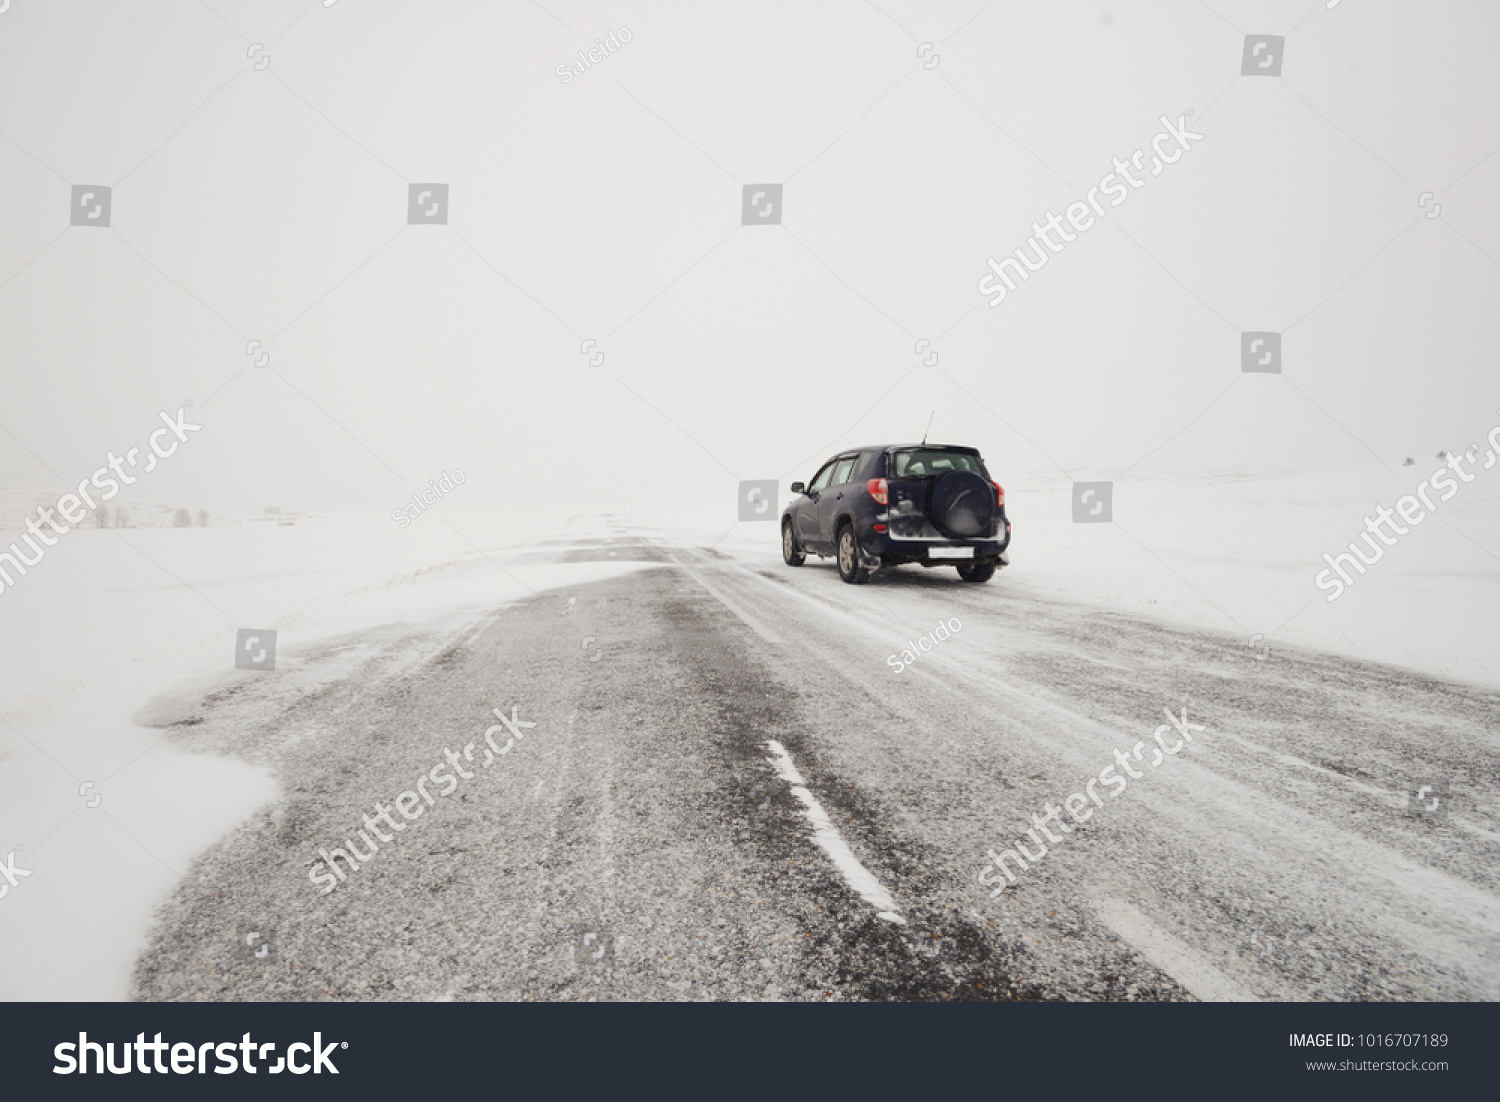 snow-covered fields and a road in winter during a blizzard and a car #1016707189